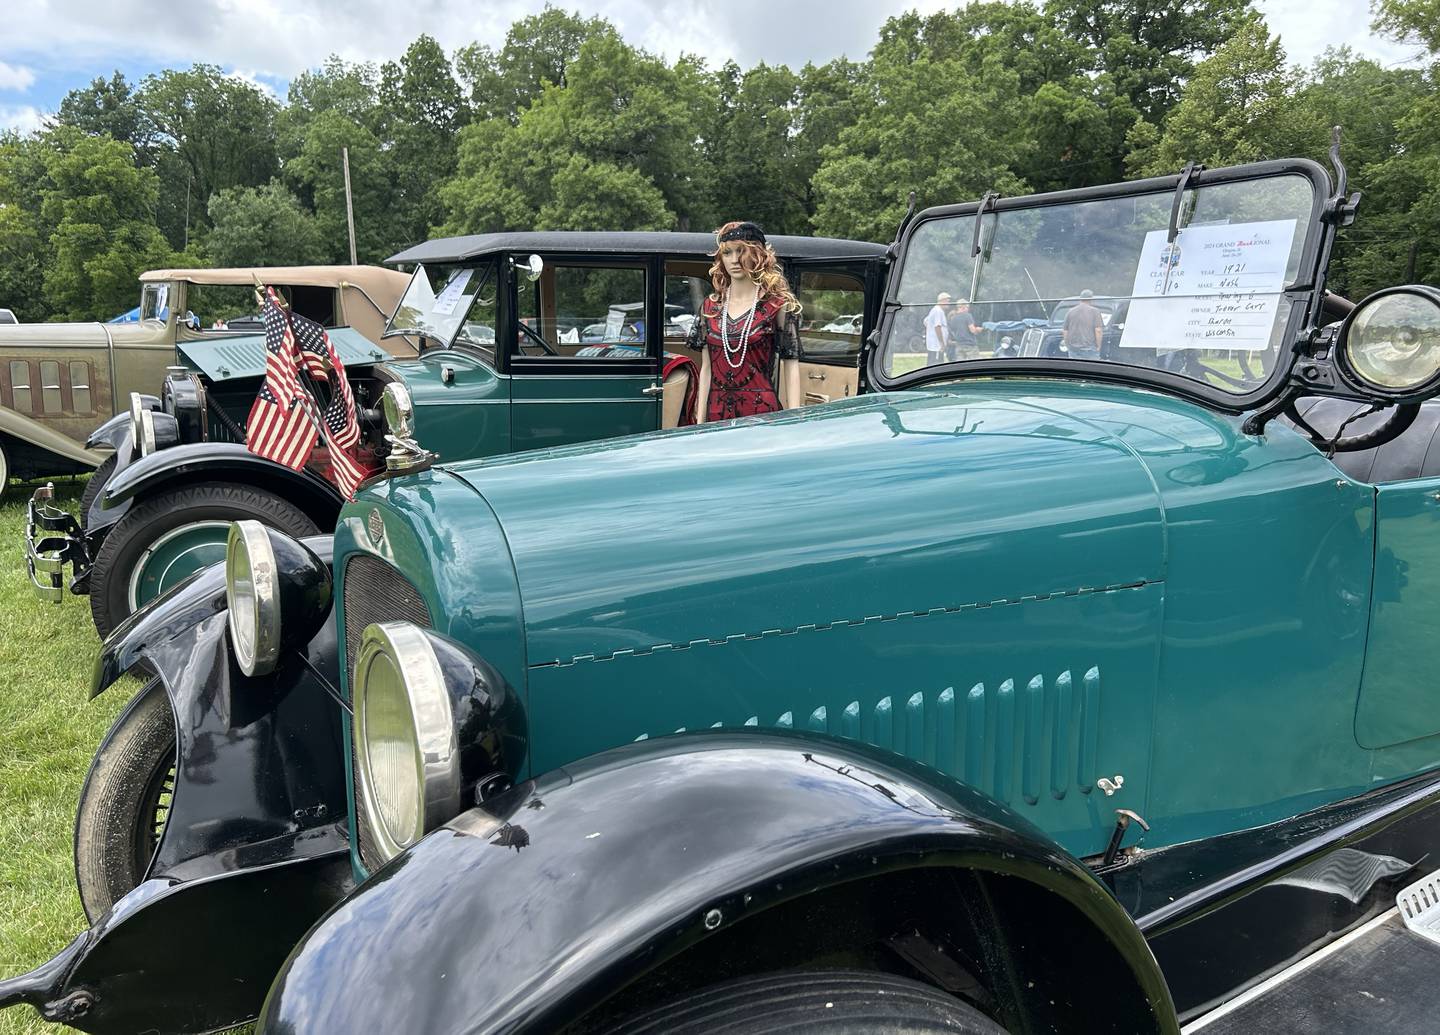 This 1921 Nash Touring 6, owned by Trevot Carr of Sharon, Wisconsin, participated in the Nashional Car Show held at the Stronghold Camp & Retreat Center on Saturday, June 29, 2024.